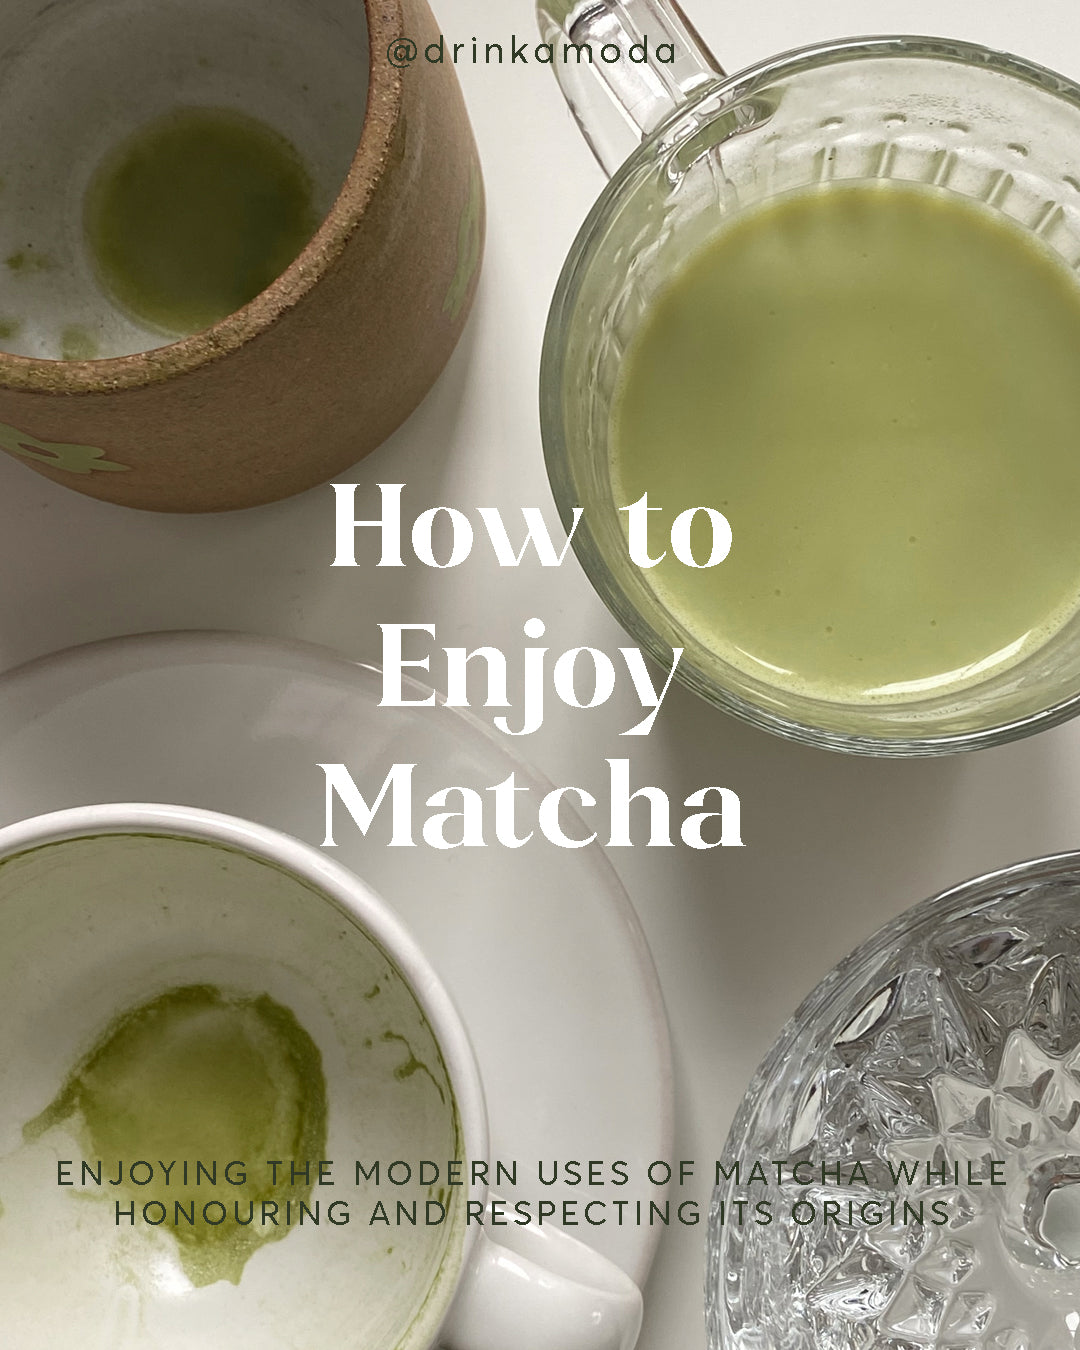 Preserving the culture of matcha in modern times